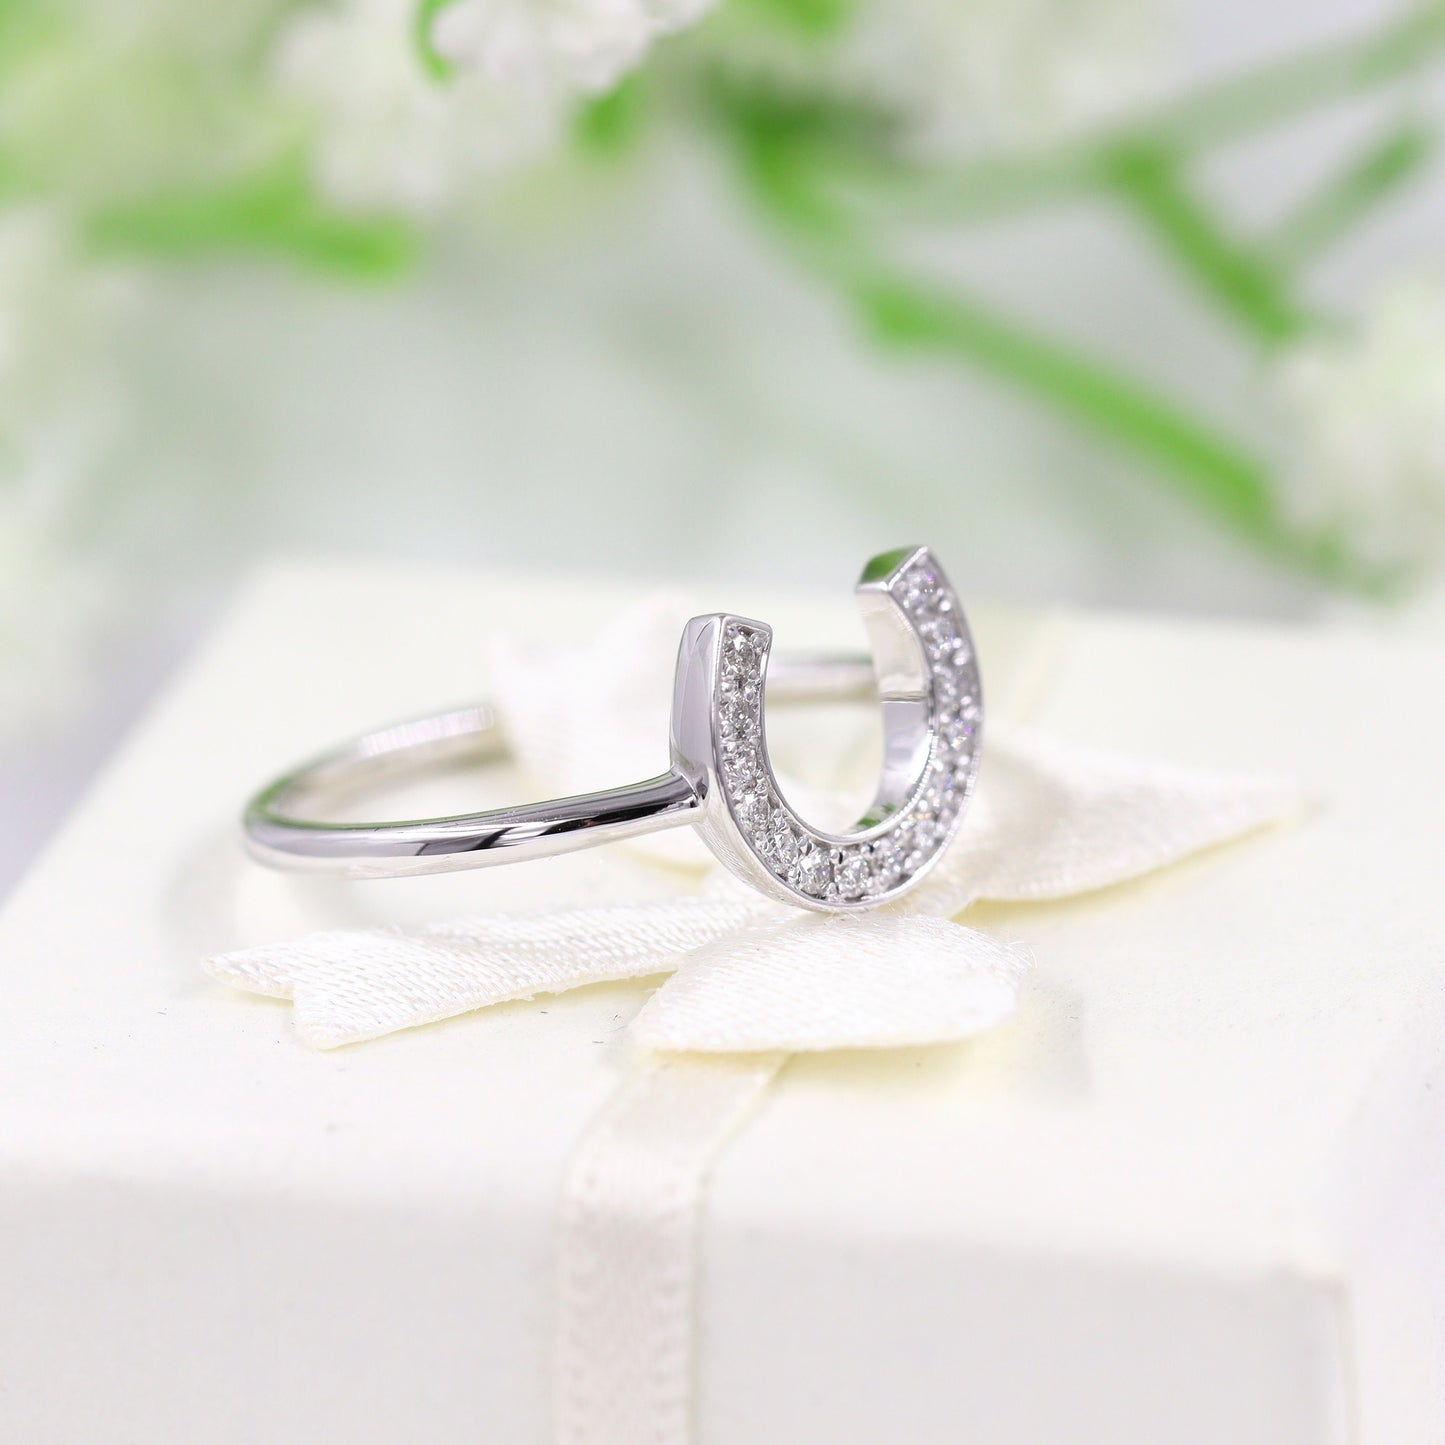 Horse shoe Diamond  Band/Unique Band/14K Solid Gold Natural Diamond Horse shoe Ring/Gift for Her/Anniversary Gift